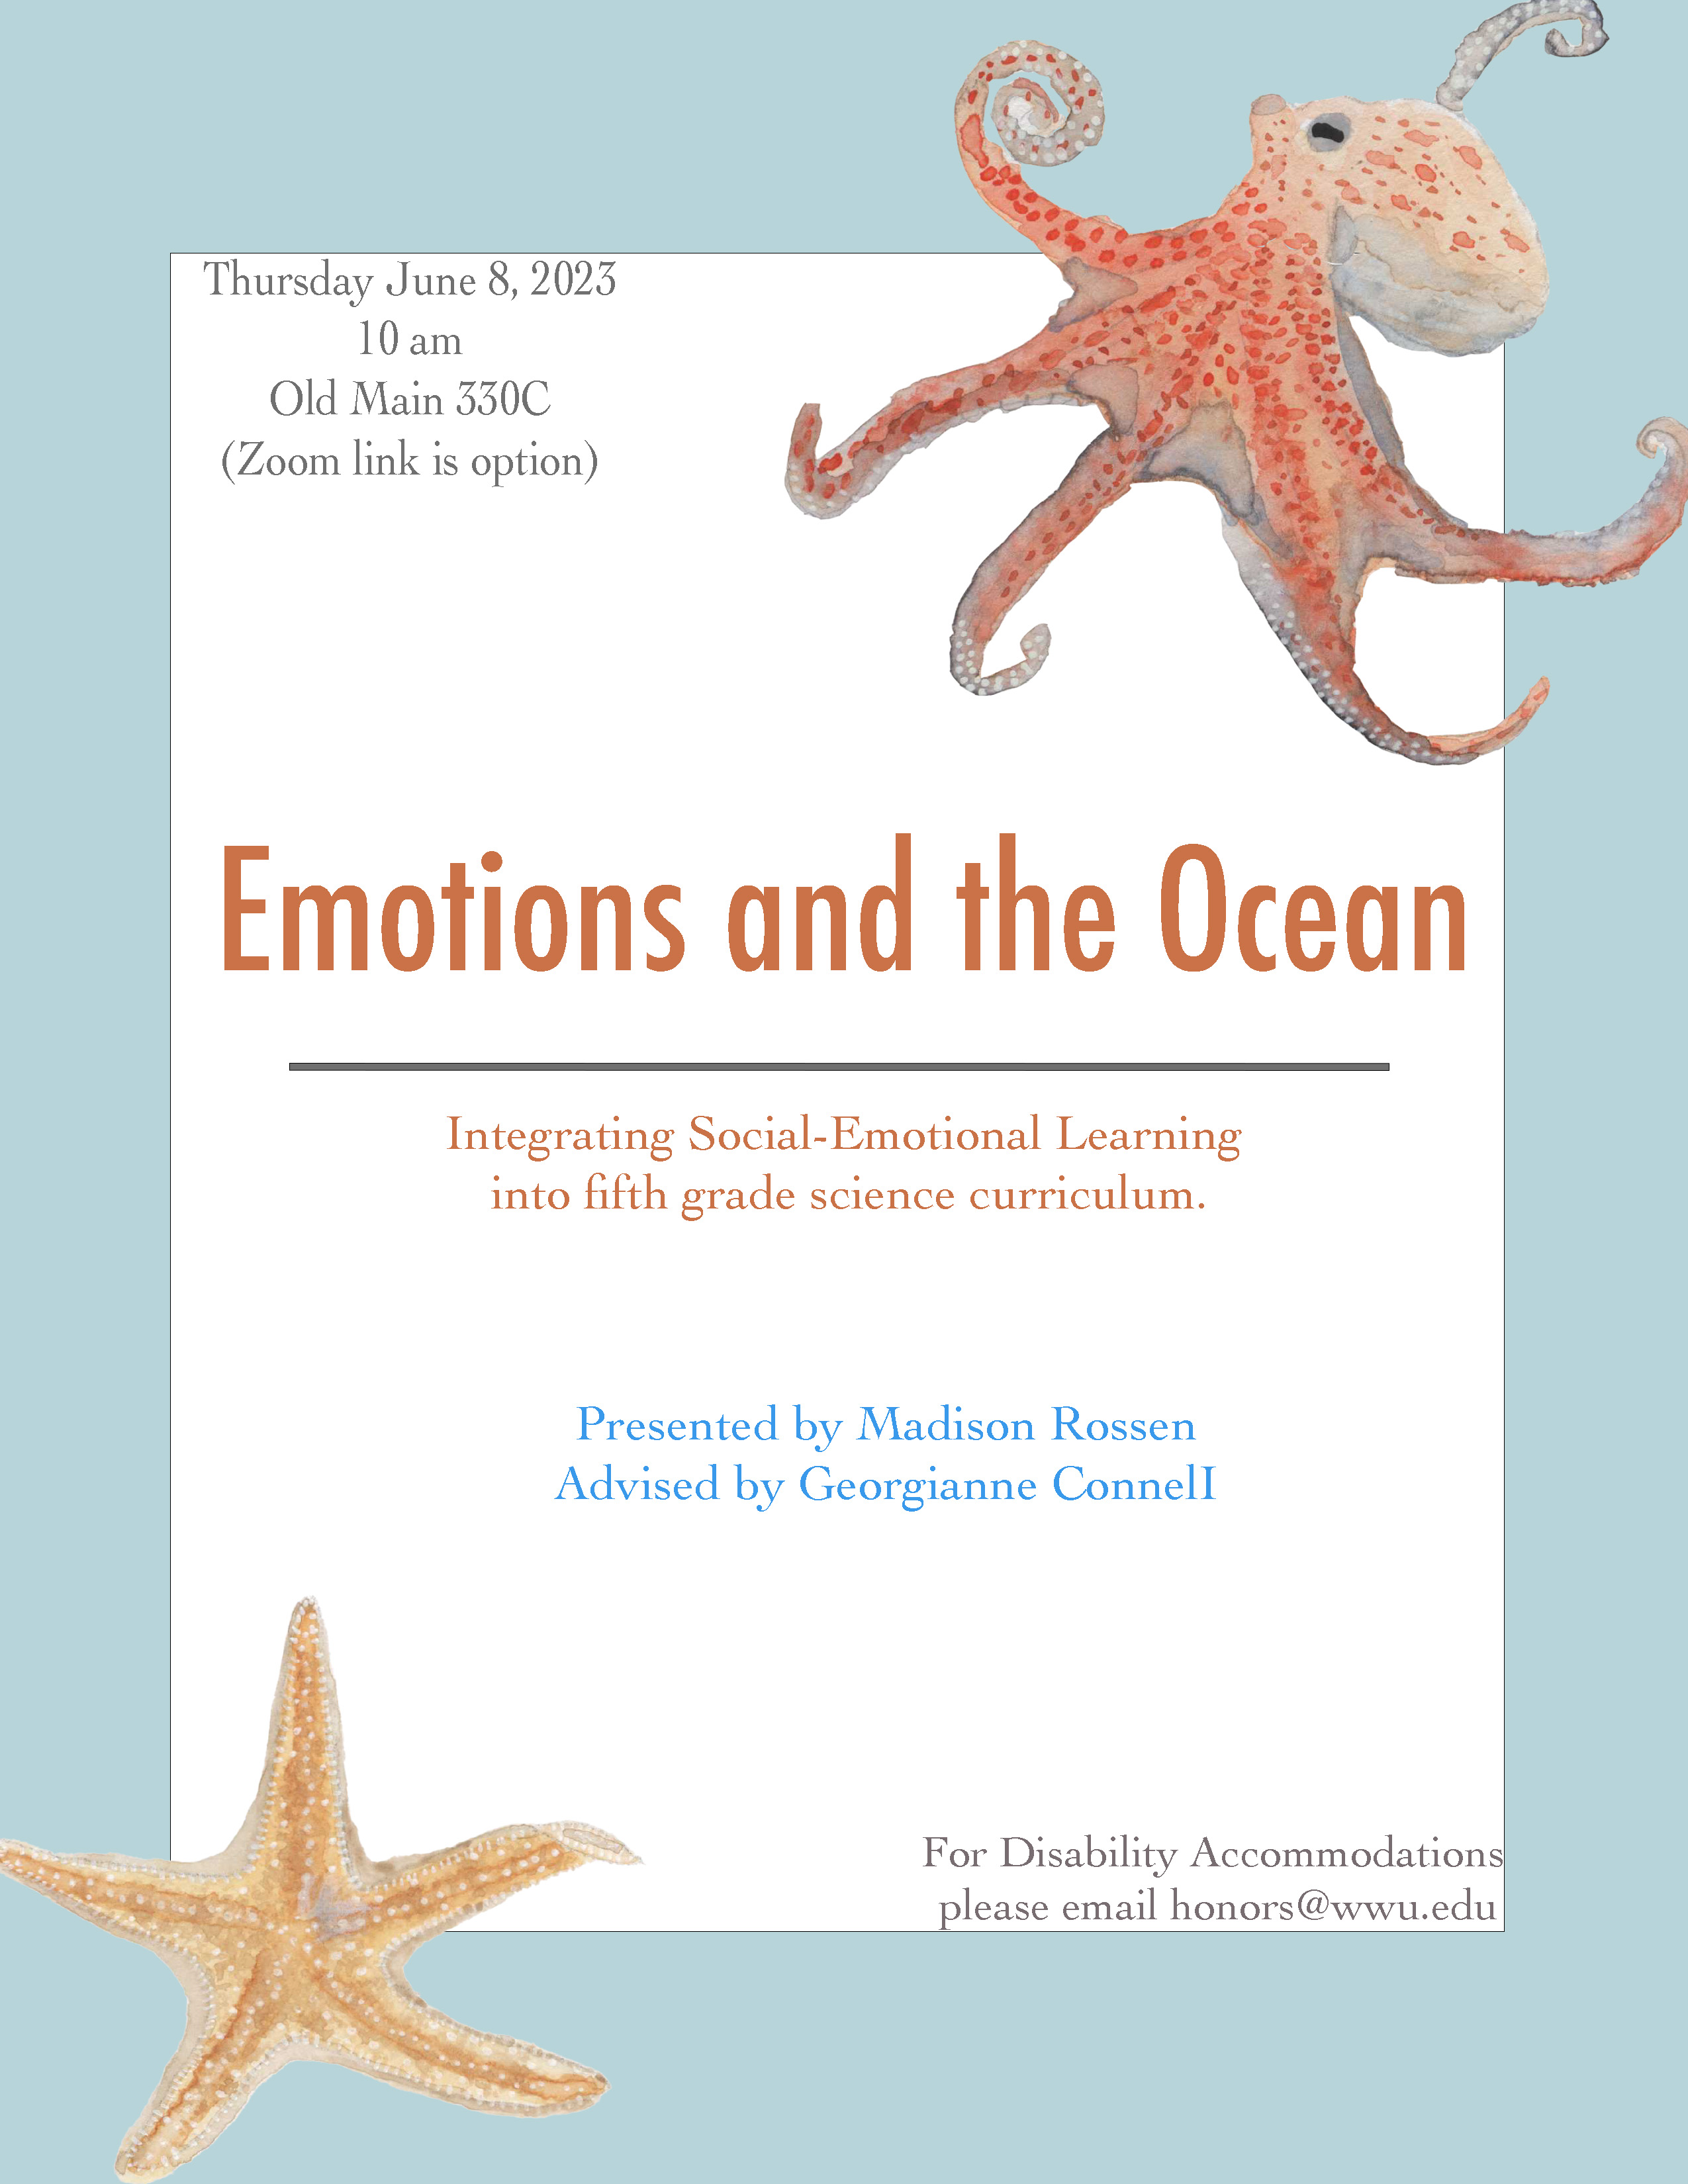 A light blue poster with a white box and drawings of an octopus and a sea star. Text reads: "Thursday June 8, 2023. 10 am. Old Main 330C (Zoom link is option). Emotions and the Ocean. Integrating Social-Emotional Learning into fifth grade science curriculum. Presented by Madison Rossen, Advised by Georgianne Connell. For disability accommodations, please email honors@wwu.edu."